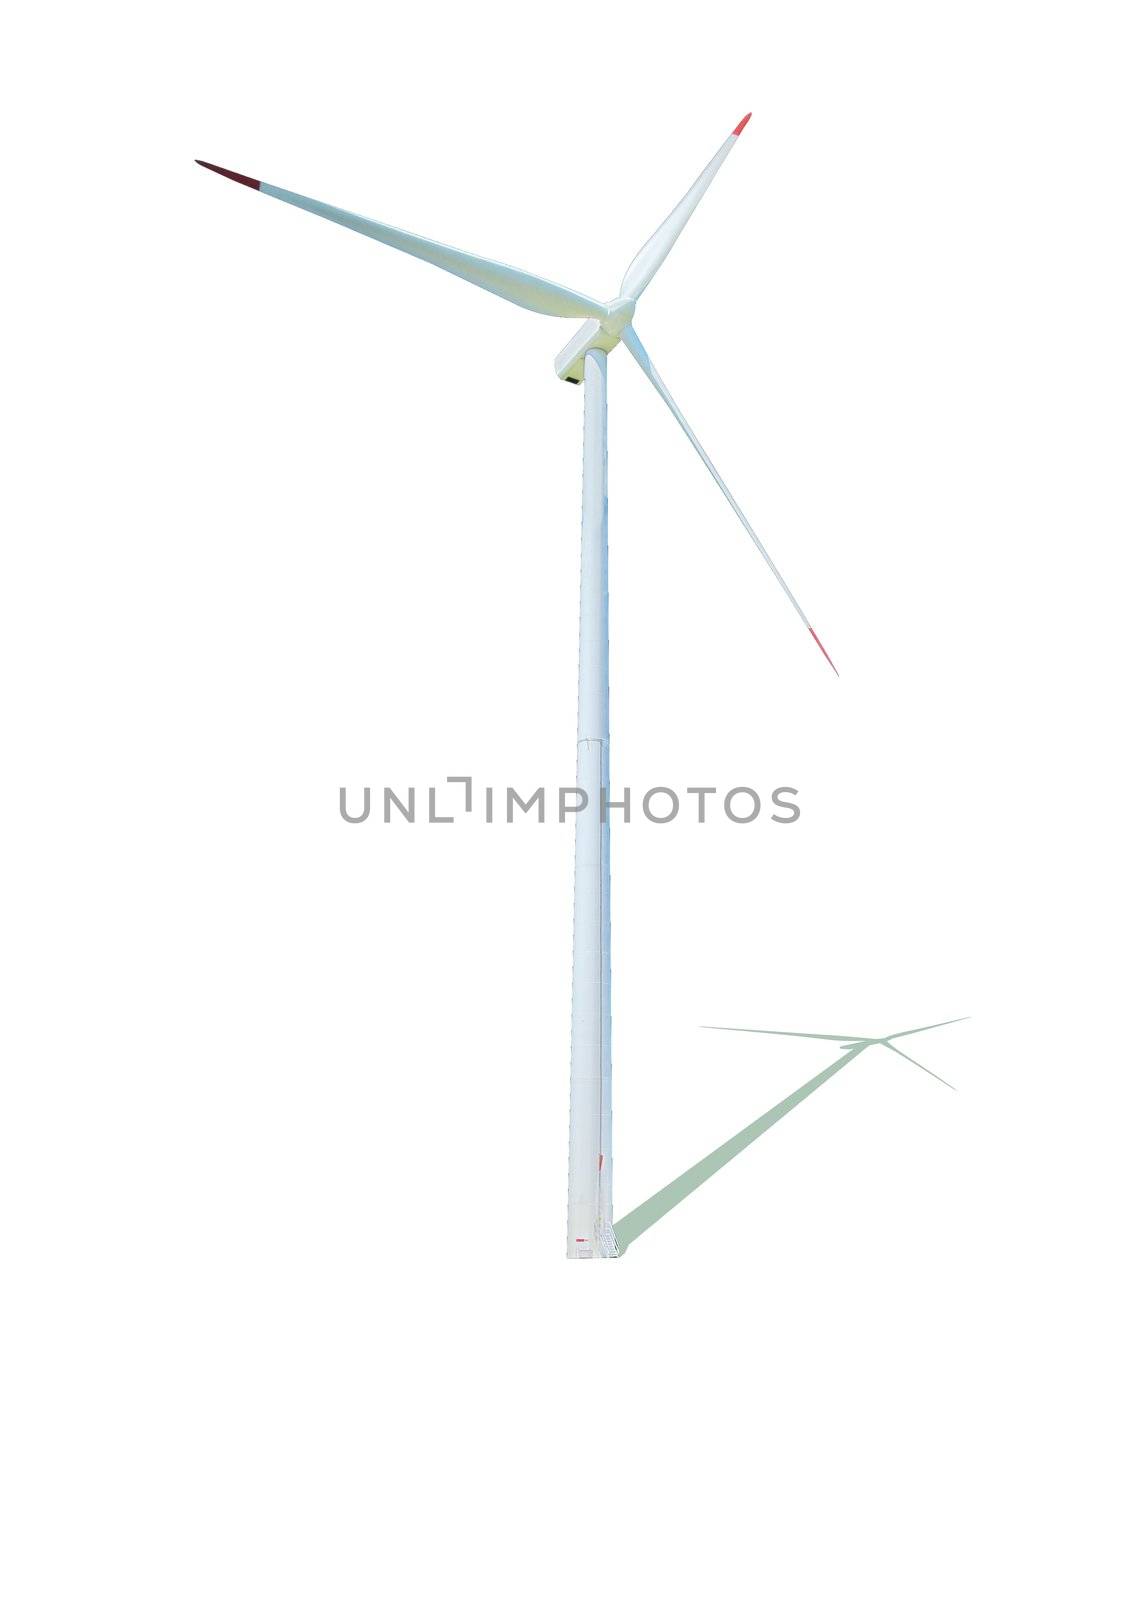 Wind turbine with its shadow in a white background